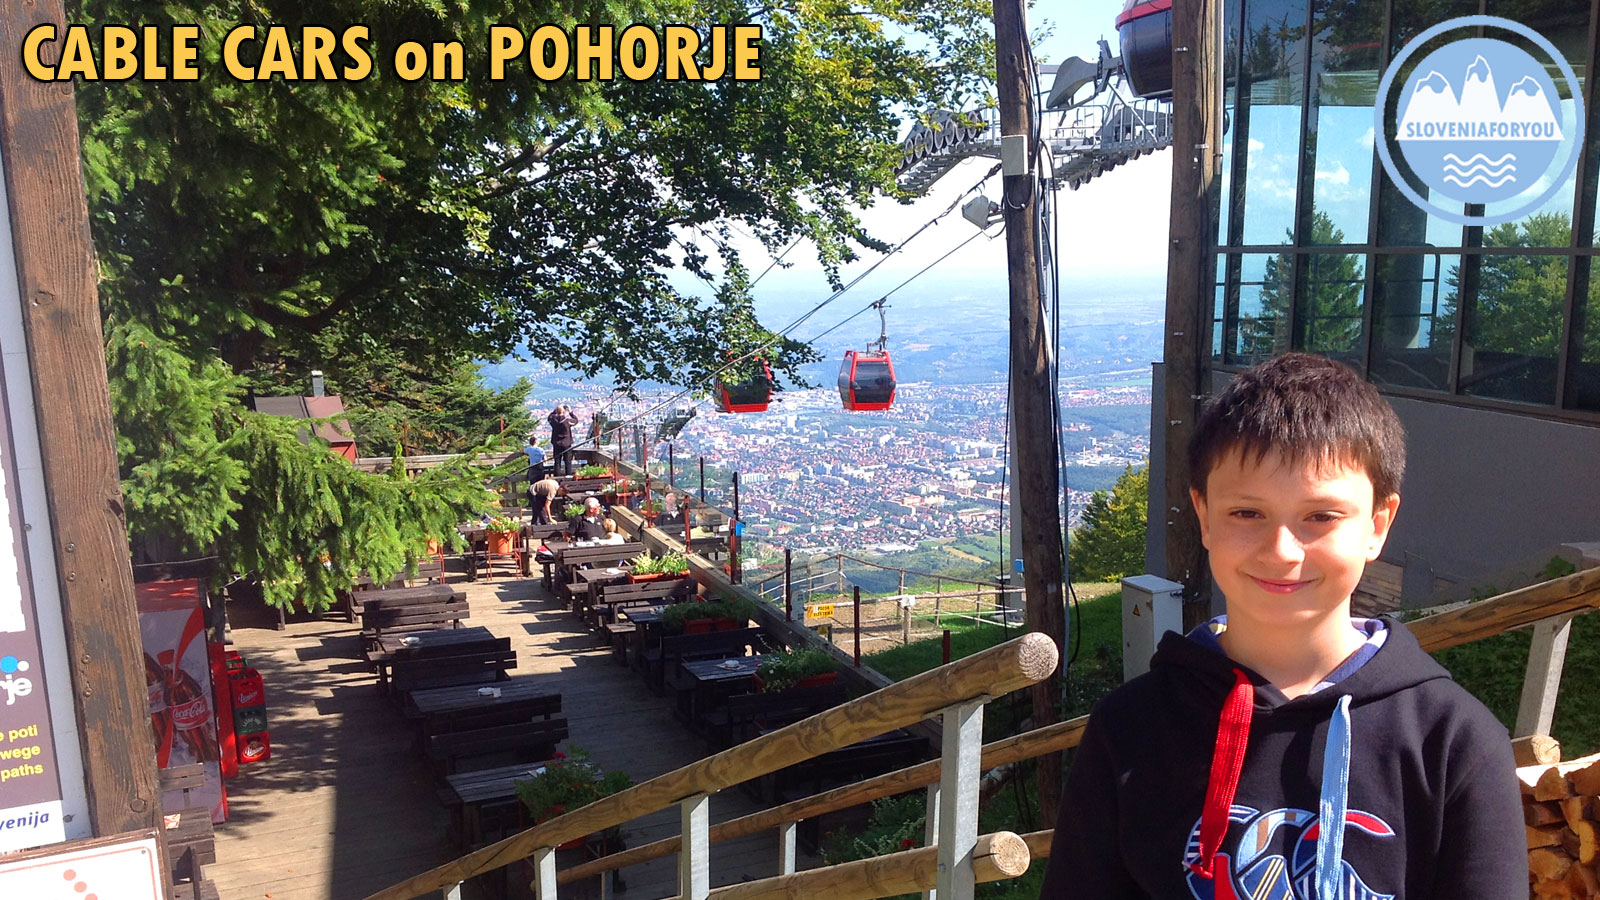 Cable car up to the Pohorje, Maribor, Sloveniaforyou